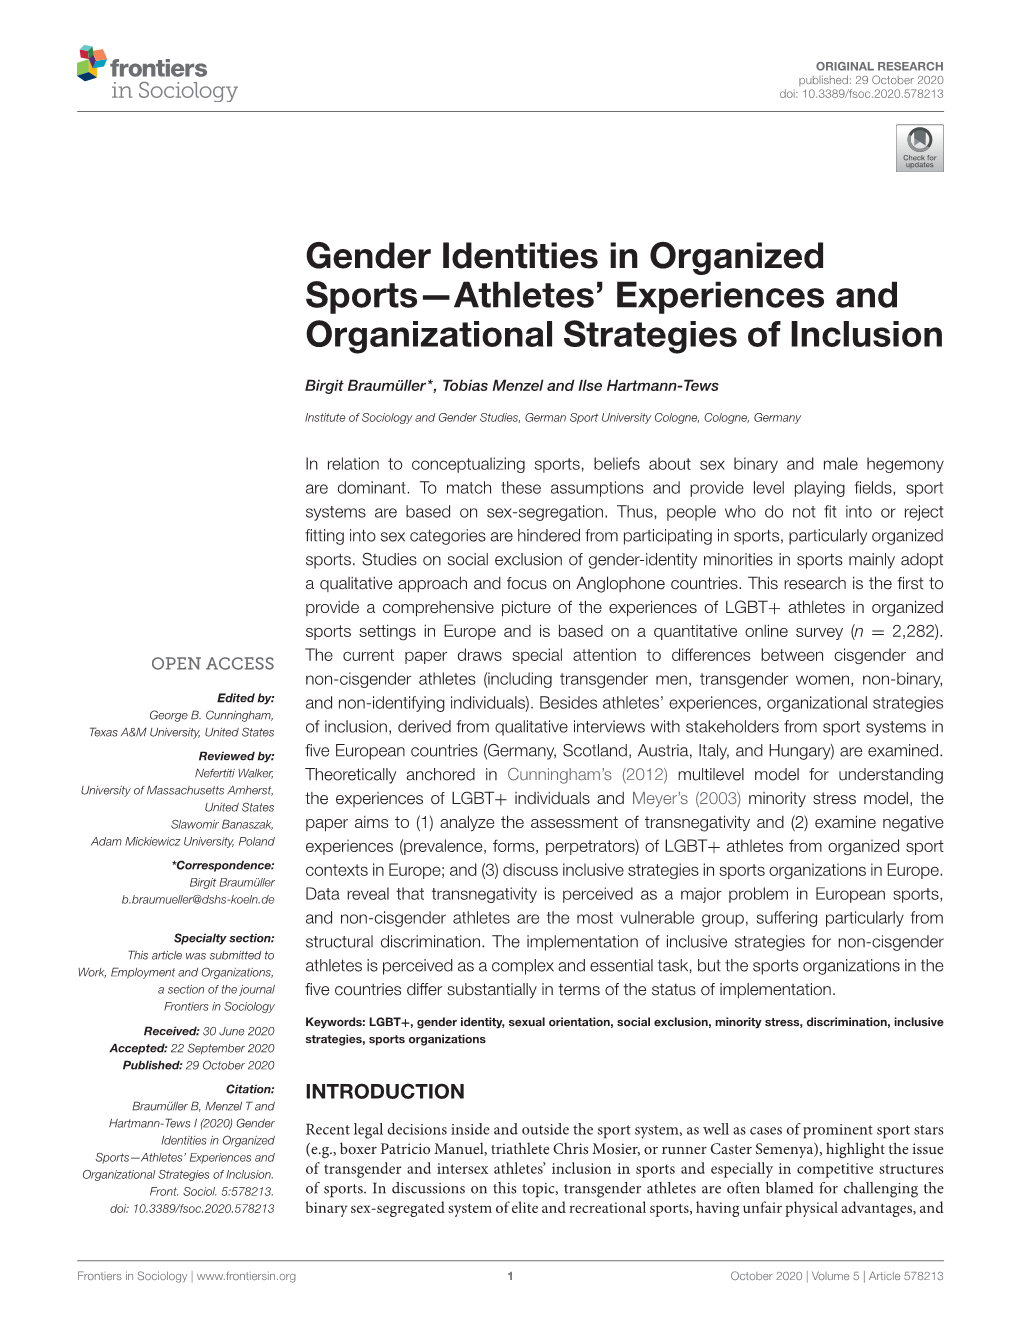 Gender Identities in Organized Sports—Athletes' Experiences And